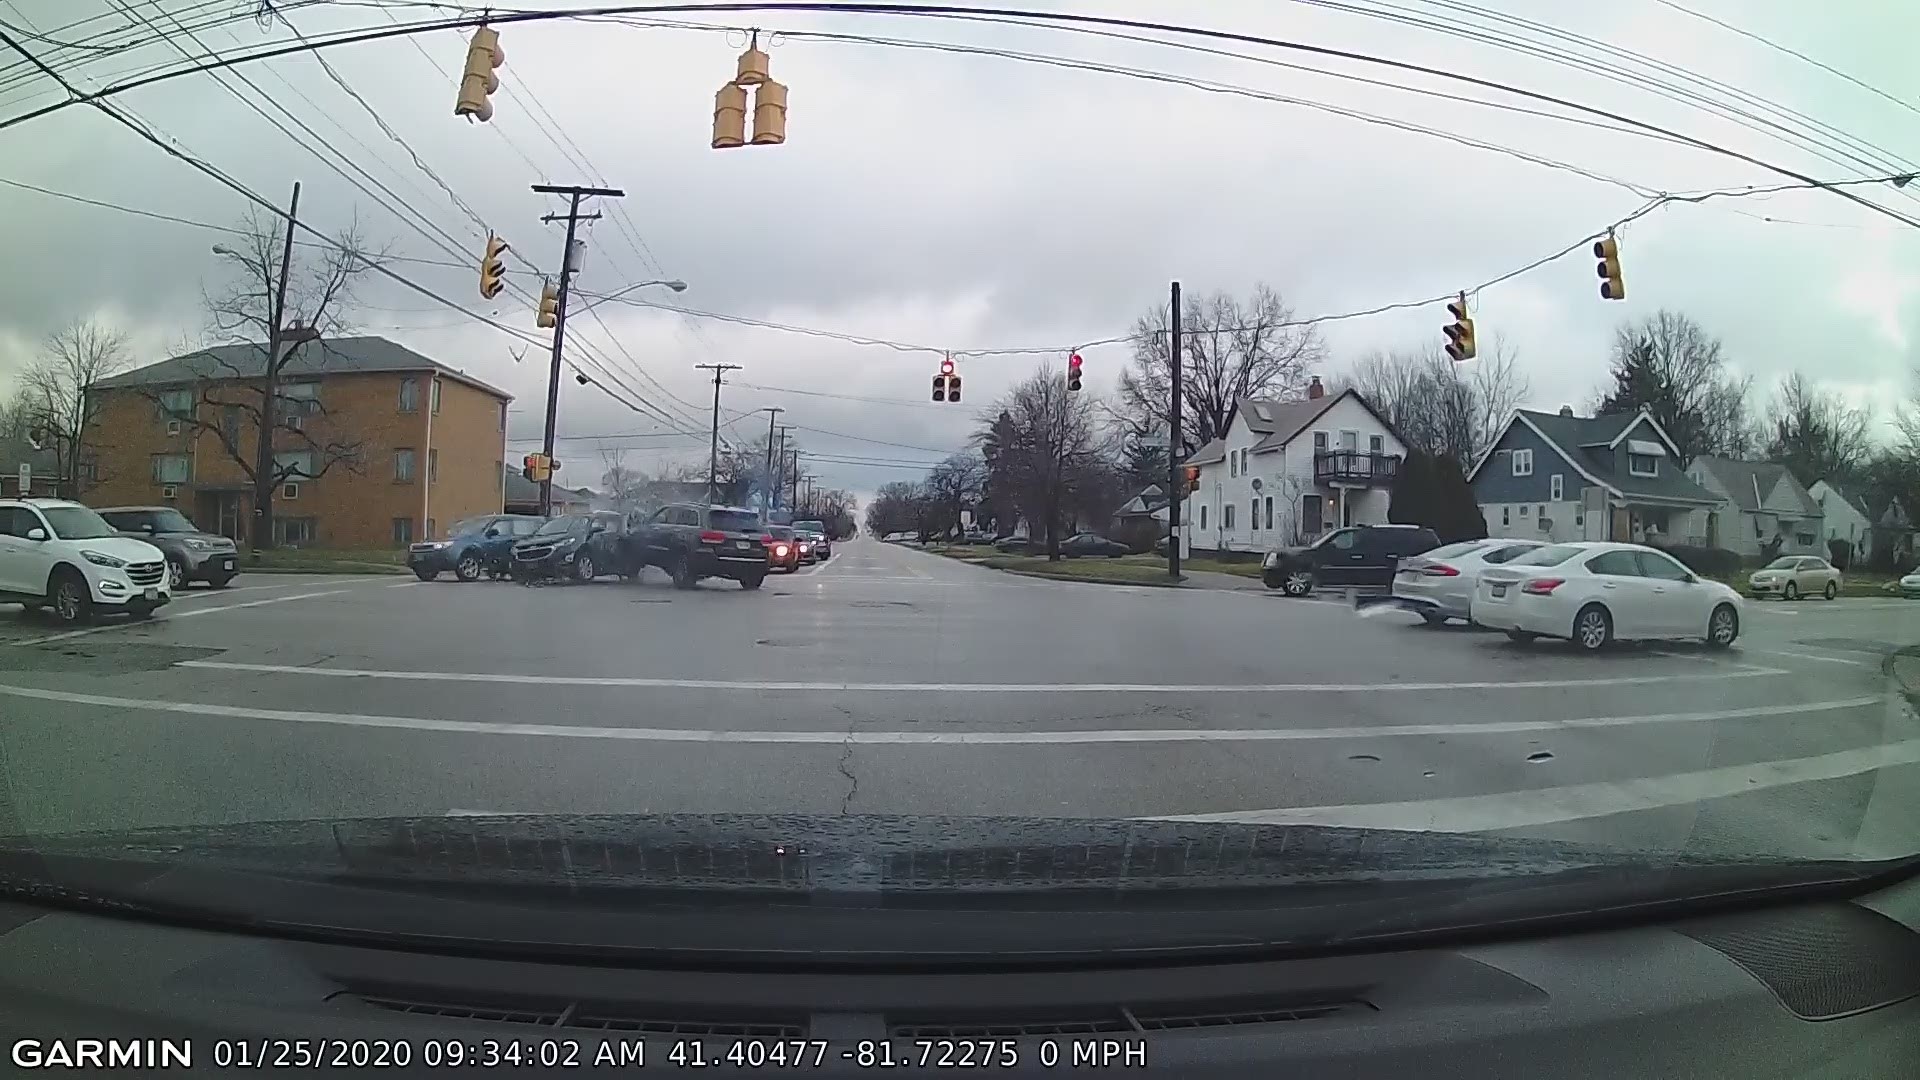 A 30-year-old man eluded police Saturday. He caused this accident which was captured on video.